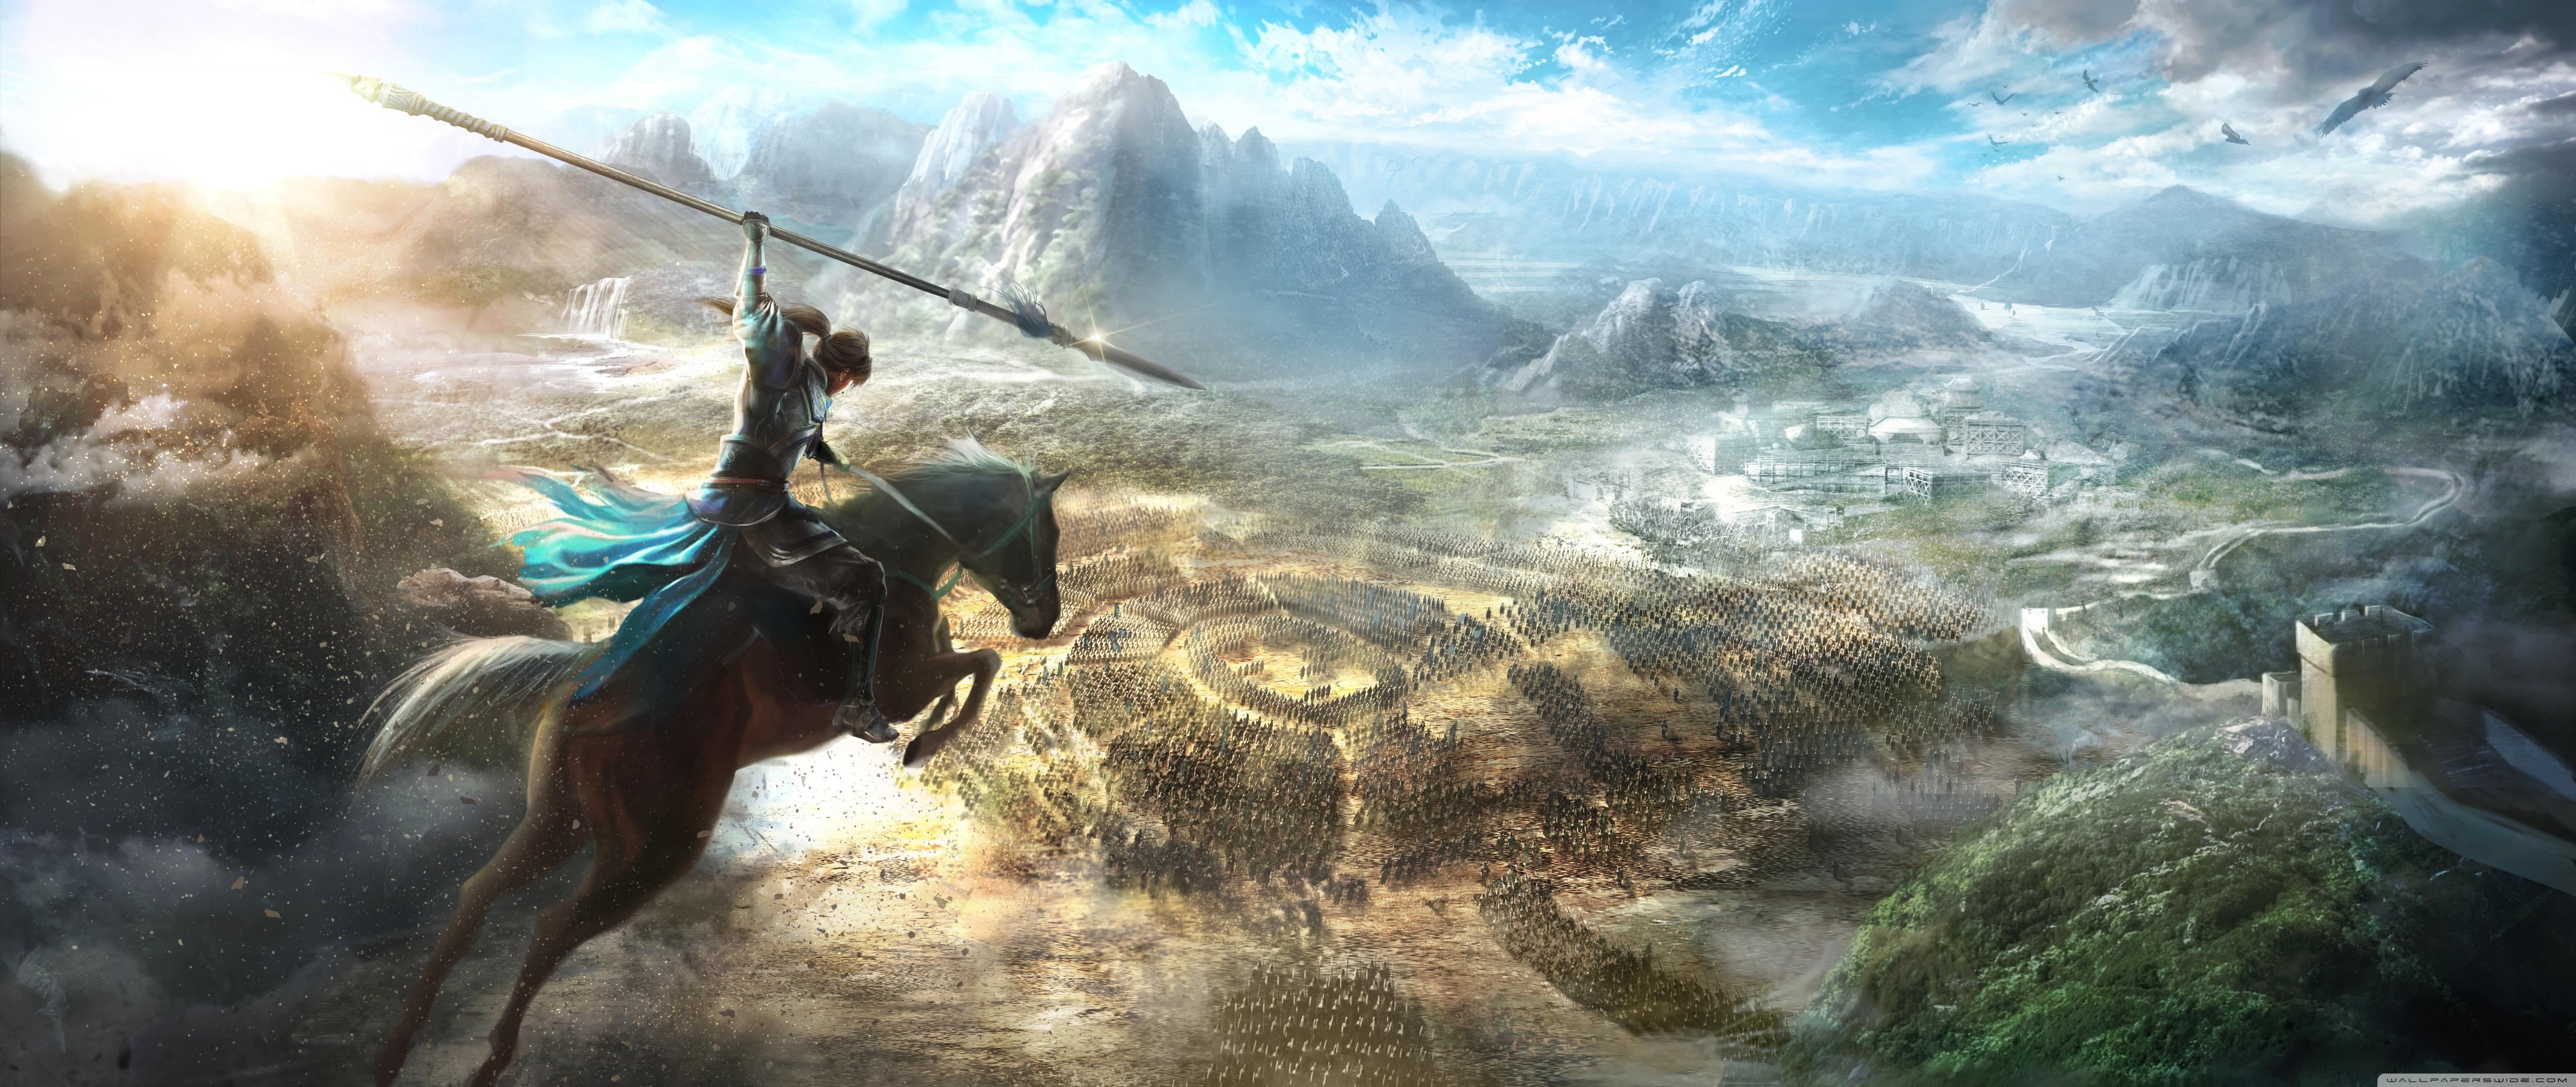 Dynasty Warriors HD Wallpapers 3